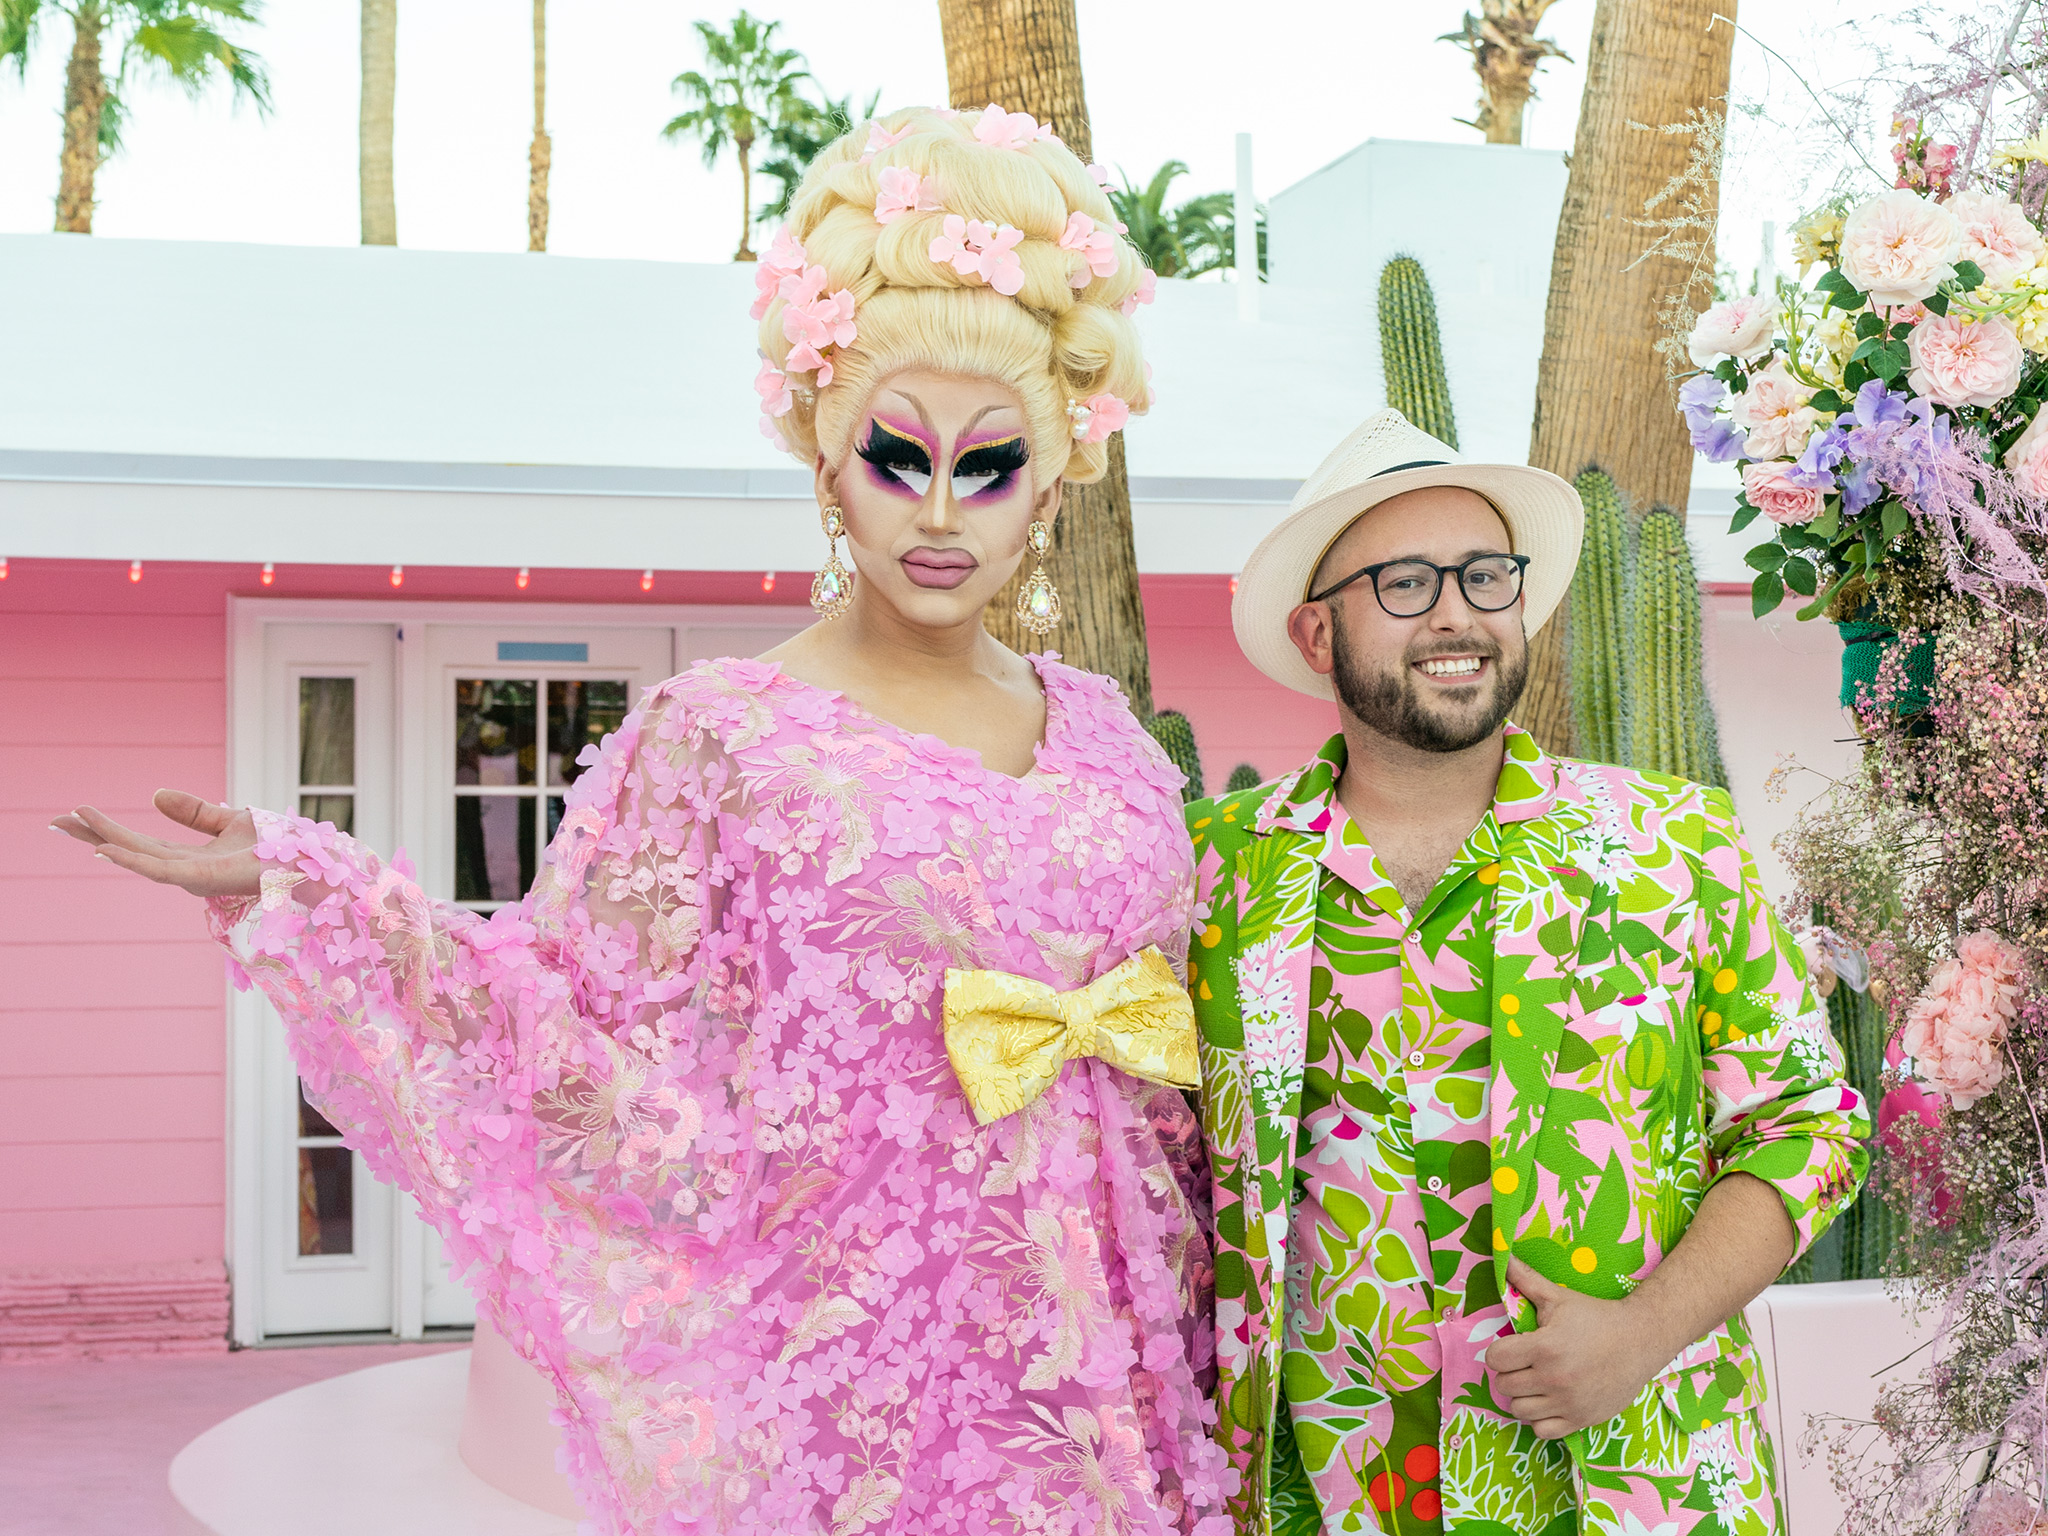 Drag Superstar Trixie Mattel Comes to HGTV in New Series